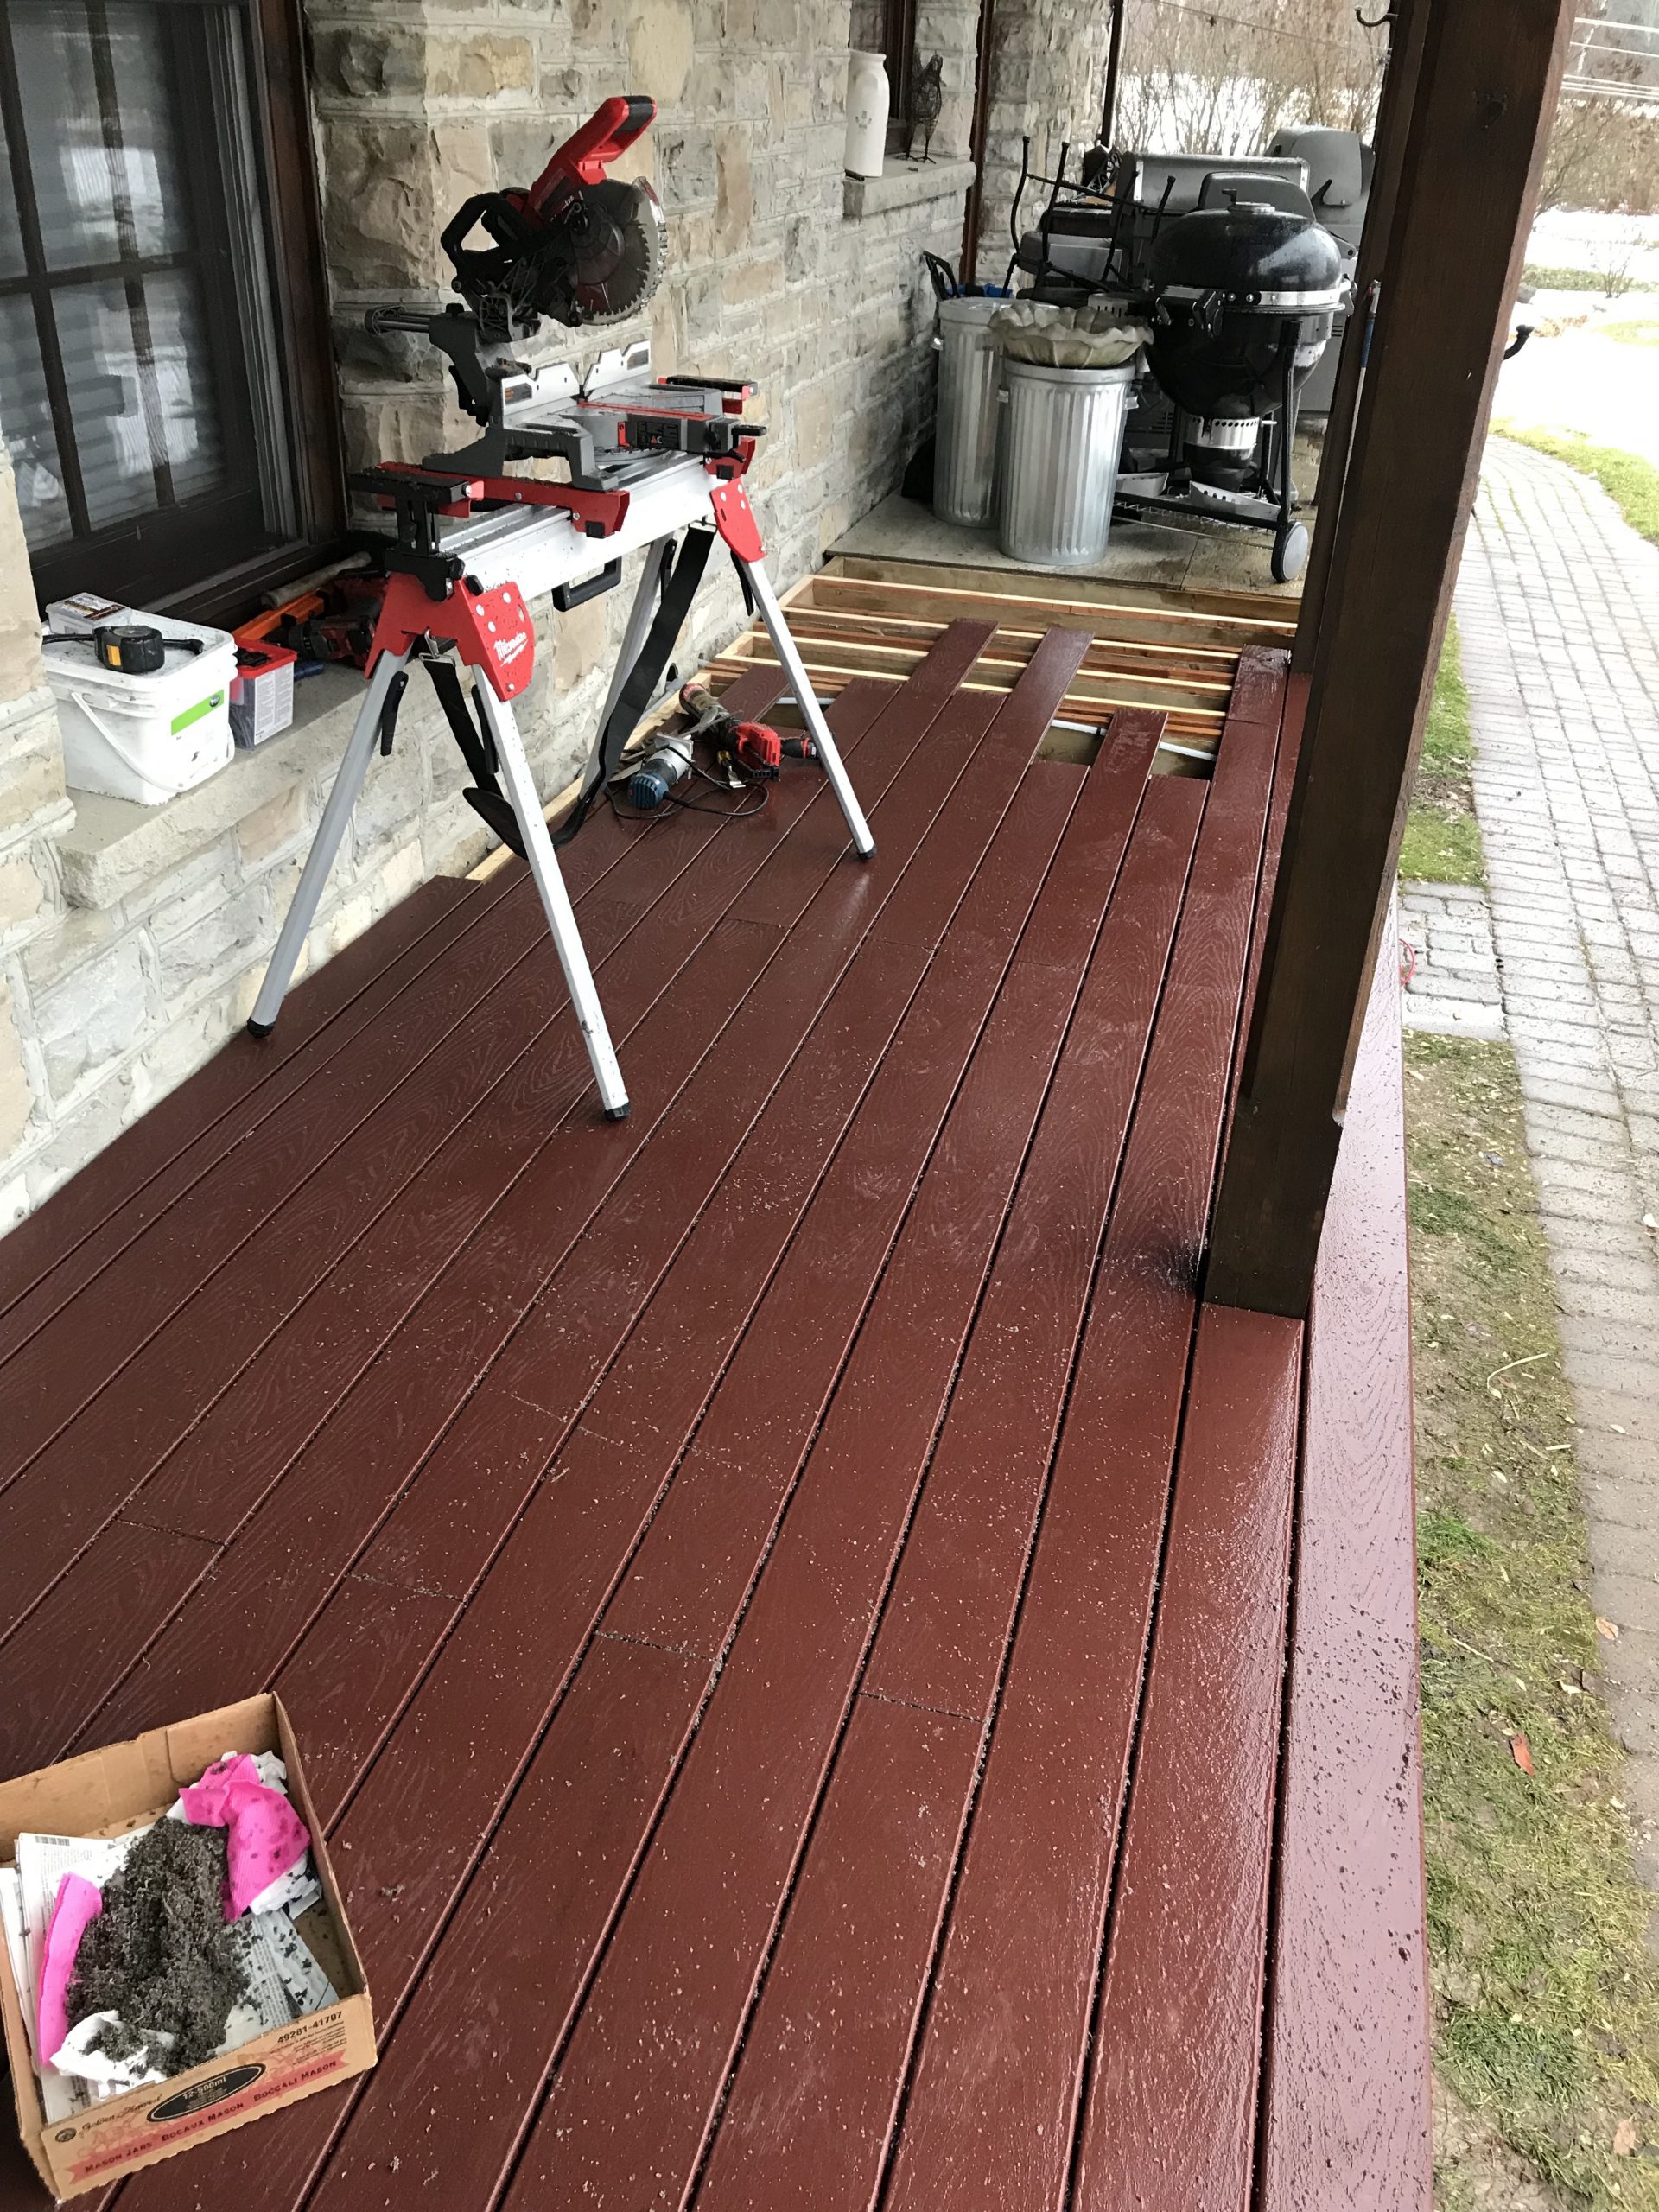 How Can I Resurface My Wooden Deck With Composite Lumber? - Baileylineroad